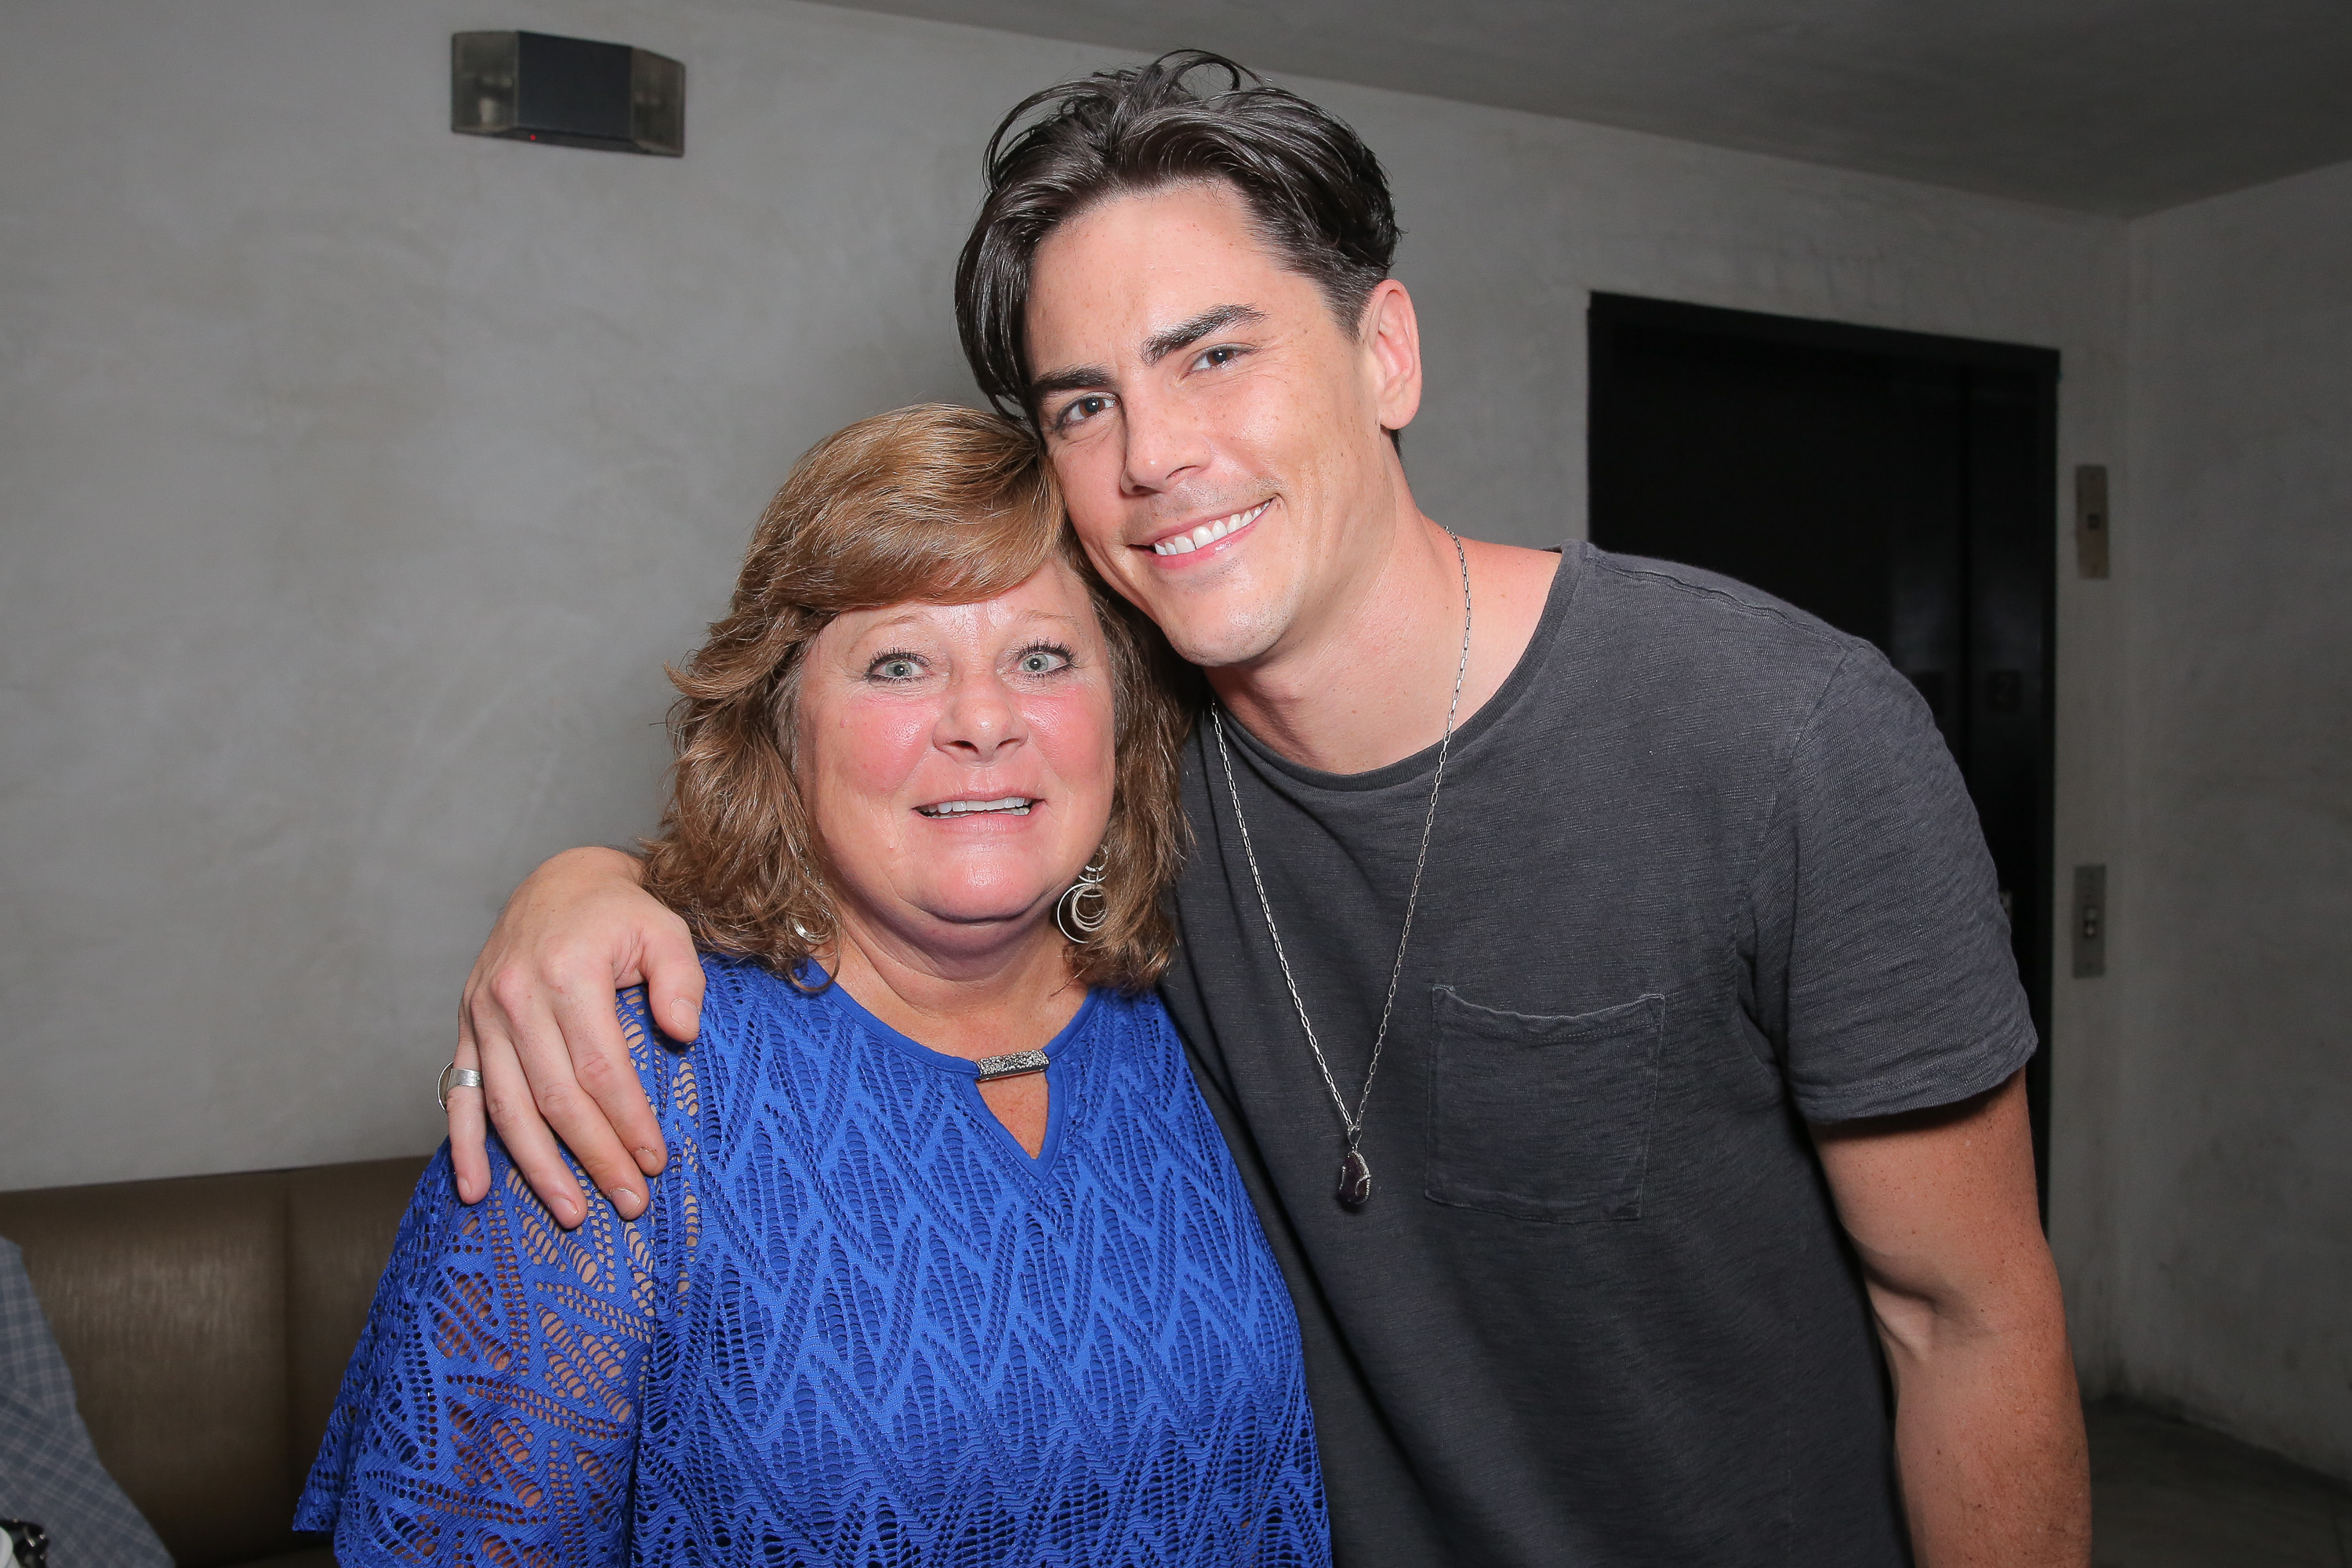 Tom Sandoval and his mother Terri Green attend the Spychatter app launch party at The Argyle on June 30, 2015, in Hollywood, California. | Source: Getty Images